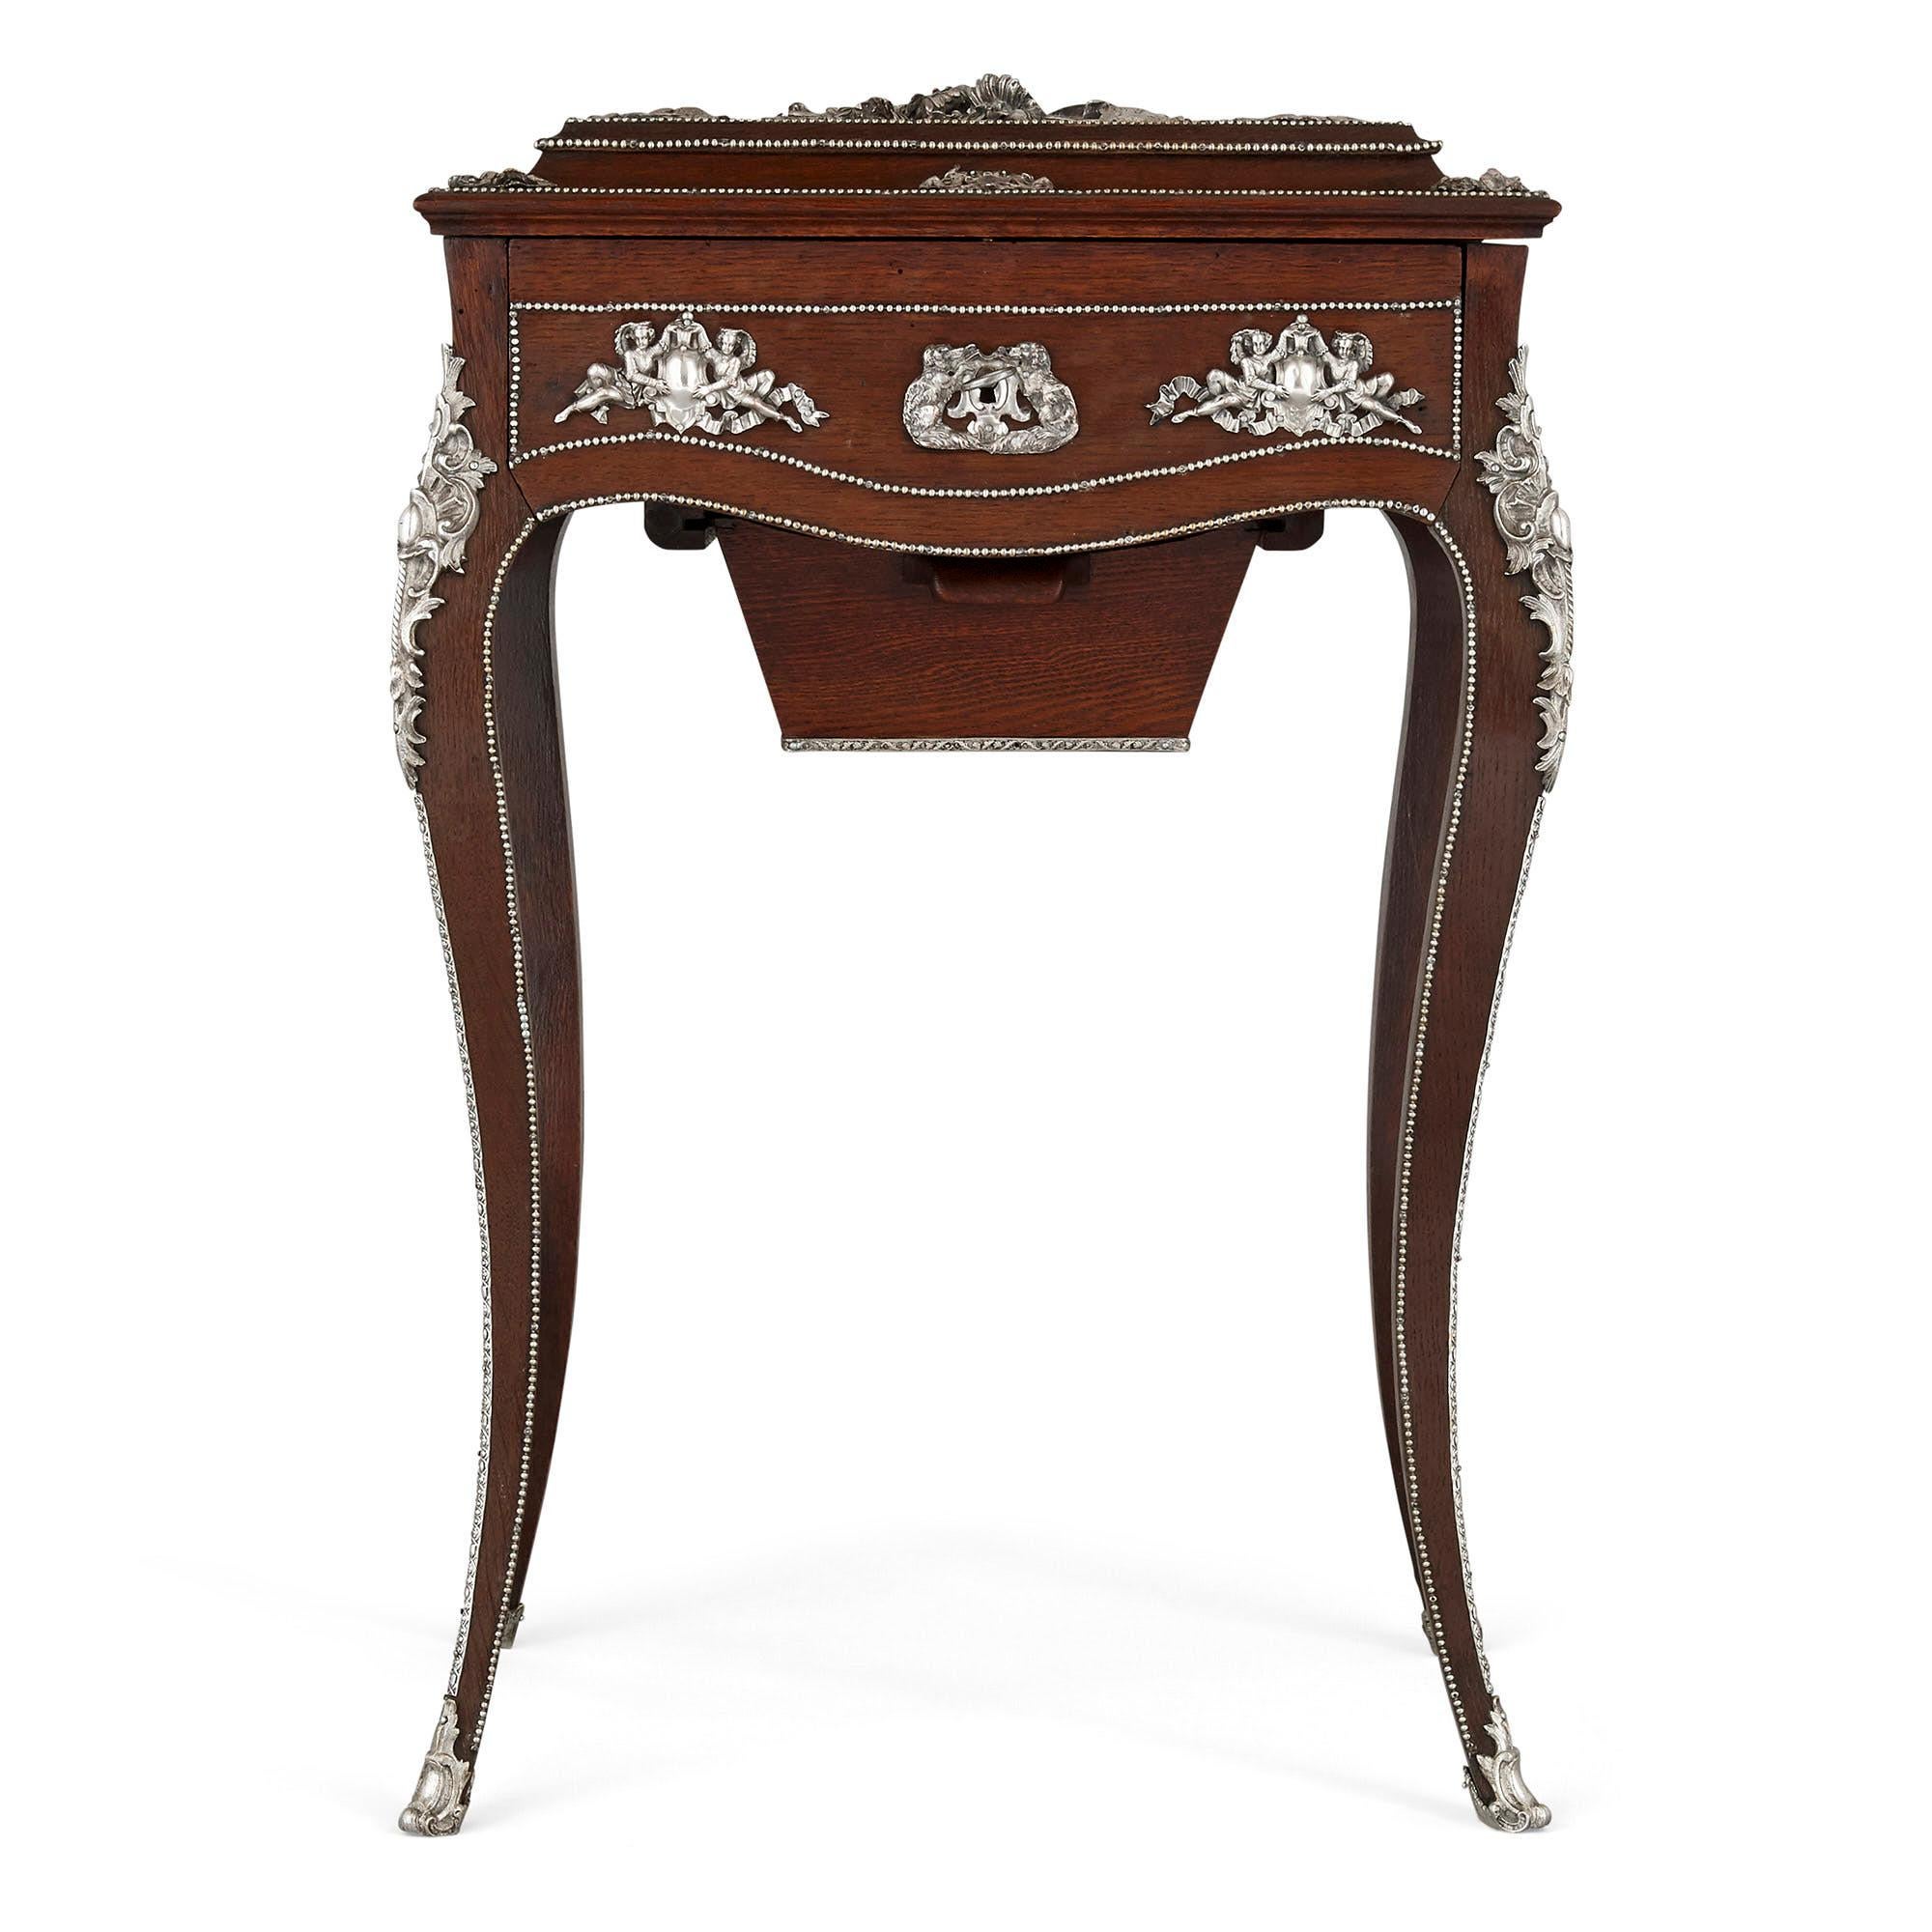 Napoleon III period dressing table, attributed to Diehl
French, circa 1870
Measures: Height 78cm, width 50cm, depth 38cm

This magnificent dressing table is crafted from dark wood mounted with silvered bronze. The table is raised on four